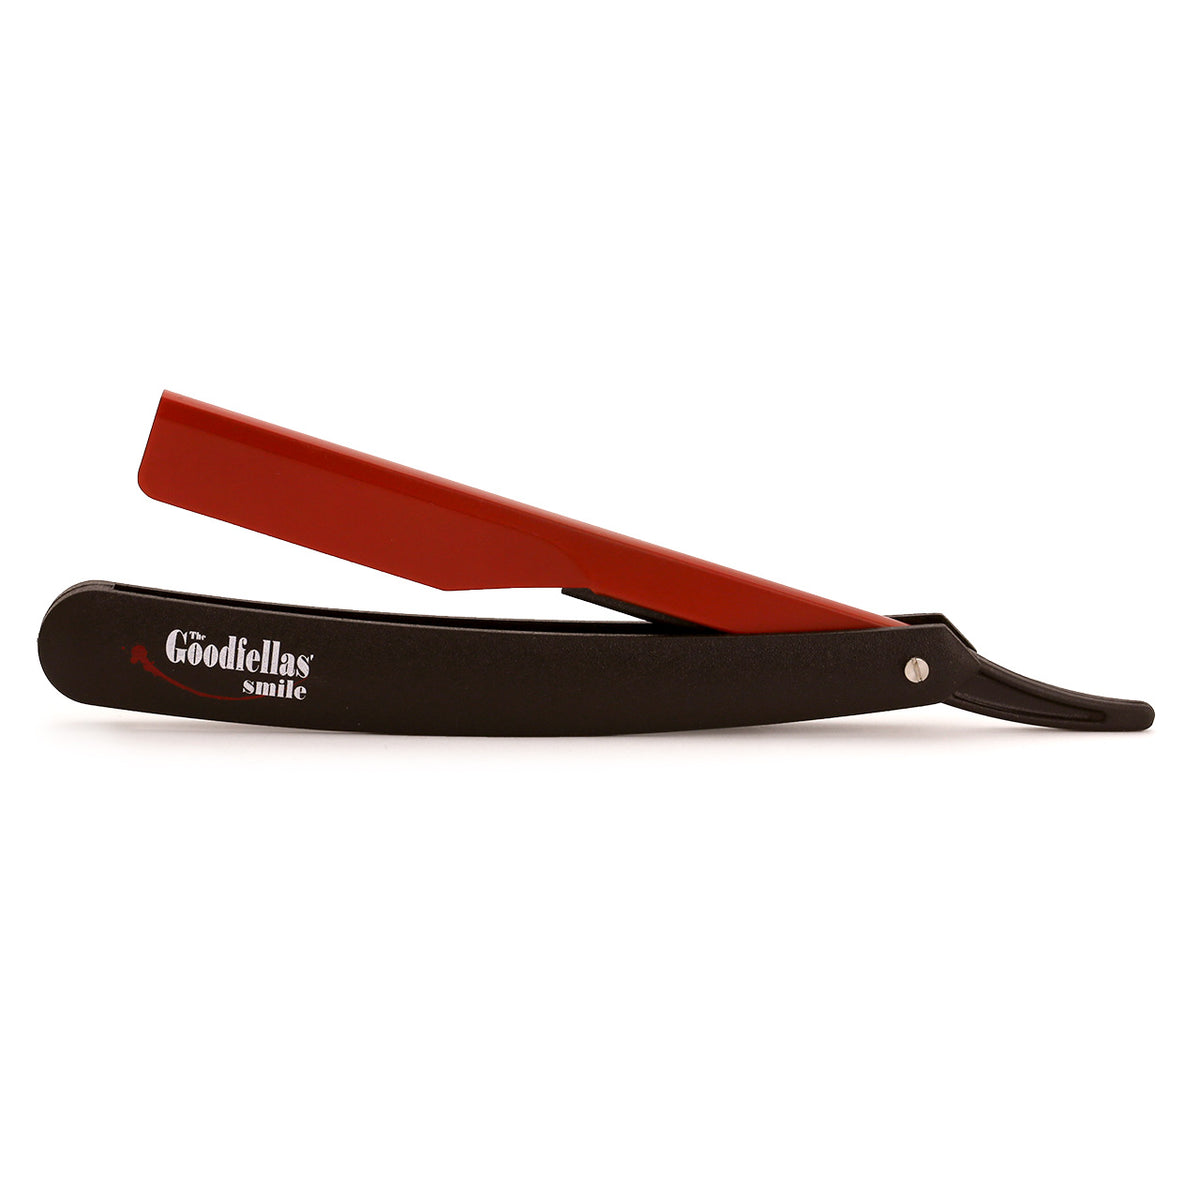 Shavette with red blade holder - Inferno